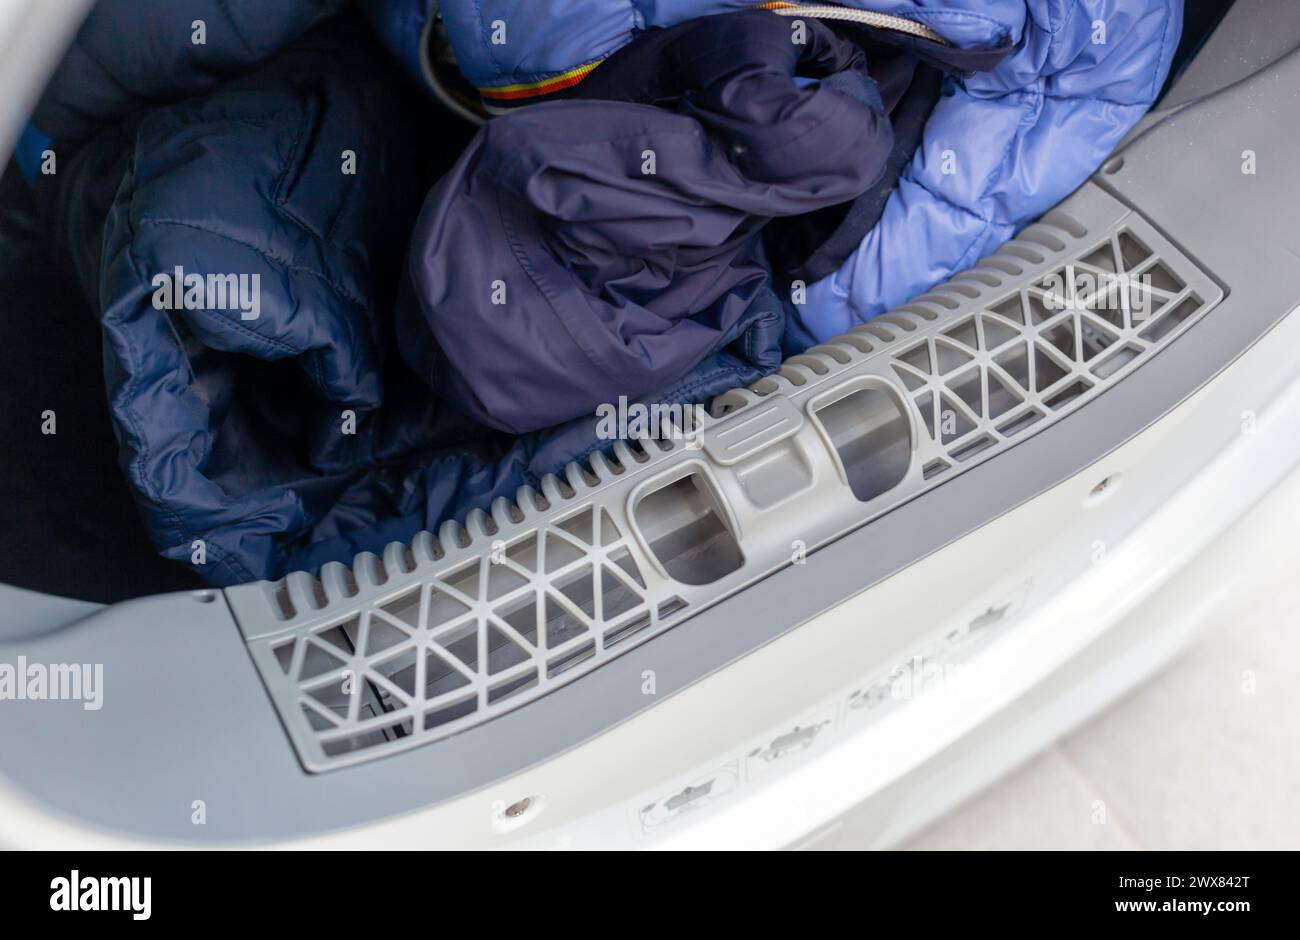 Top view of an open clothes dryer showing a clean lint filter and freshly dried laundry inside Stock Photo